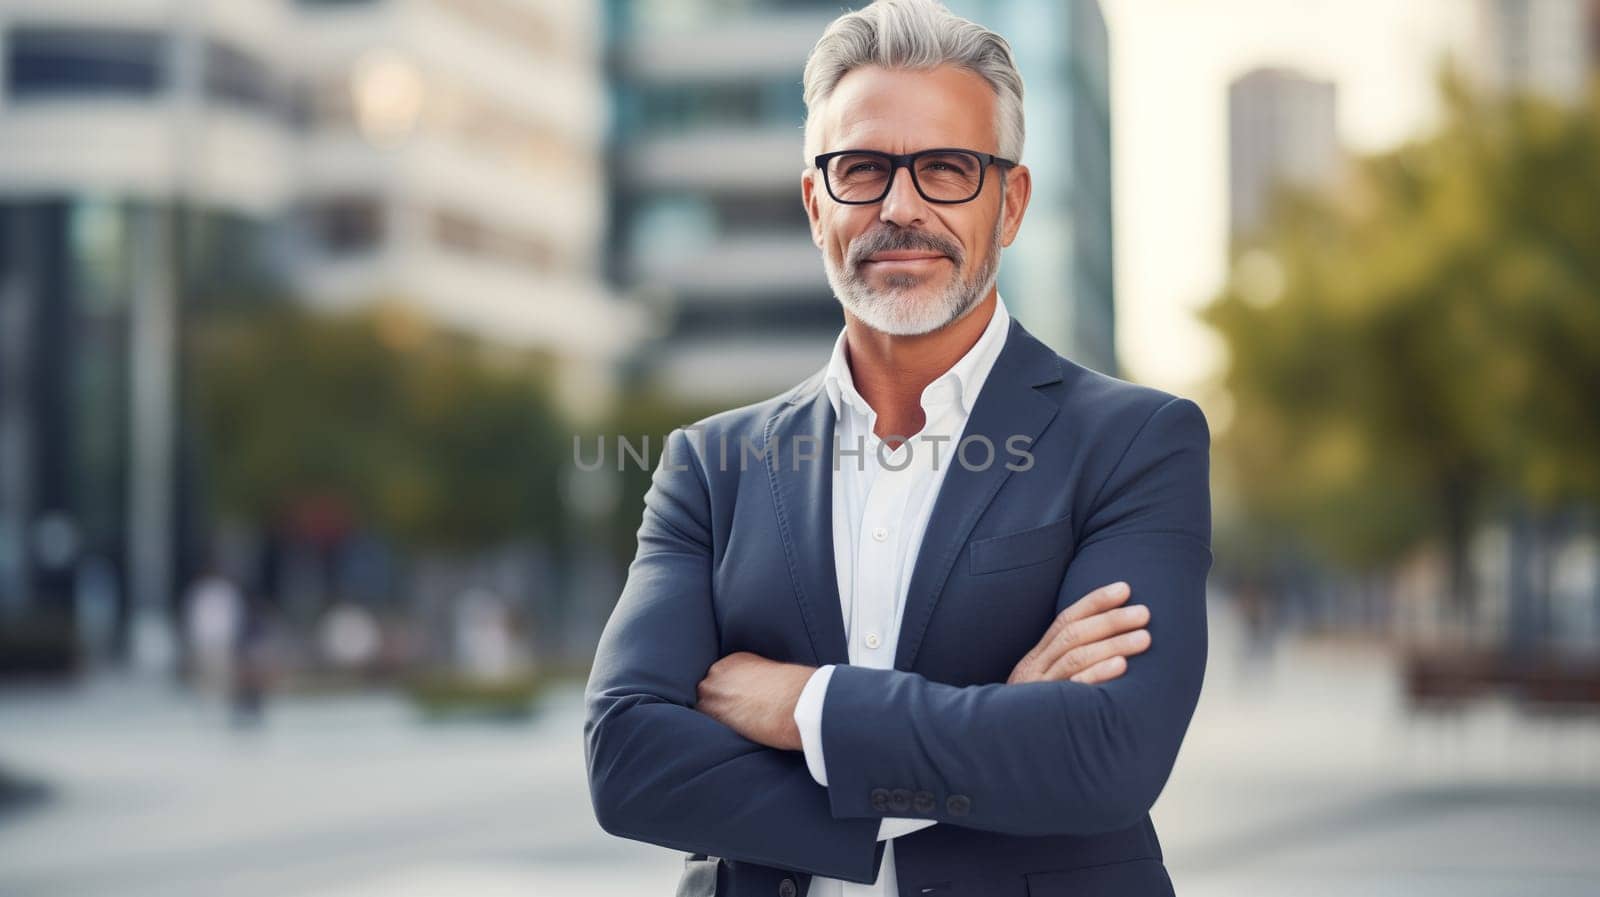 Successful handsome gray-haired mature businessman standing with crossed arms in the city, wearing business suit, glasses and looking at camera